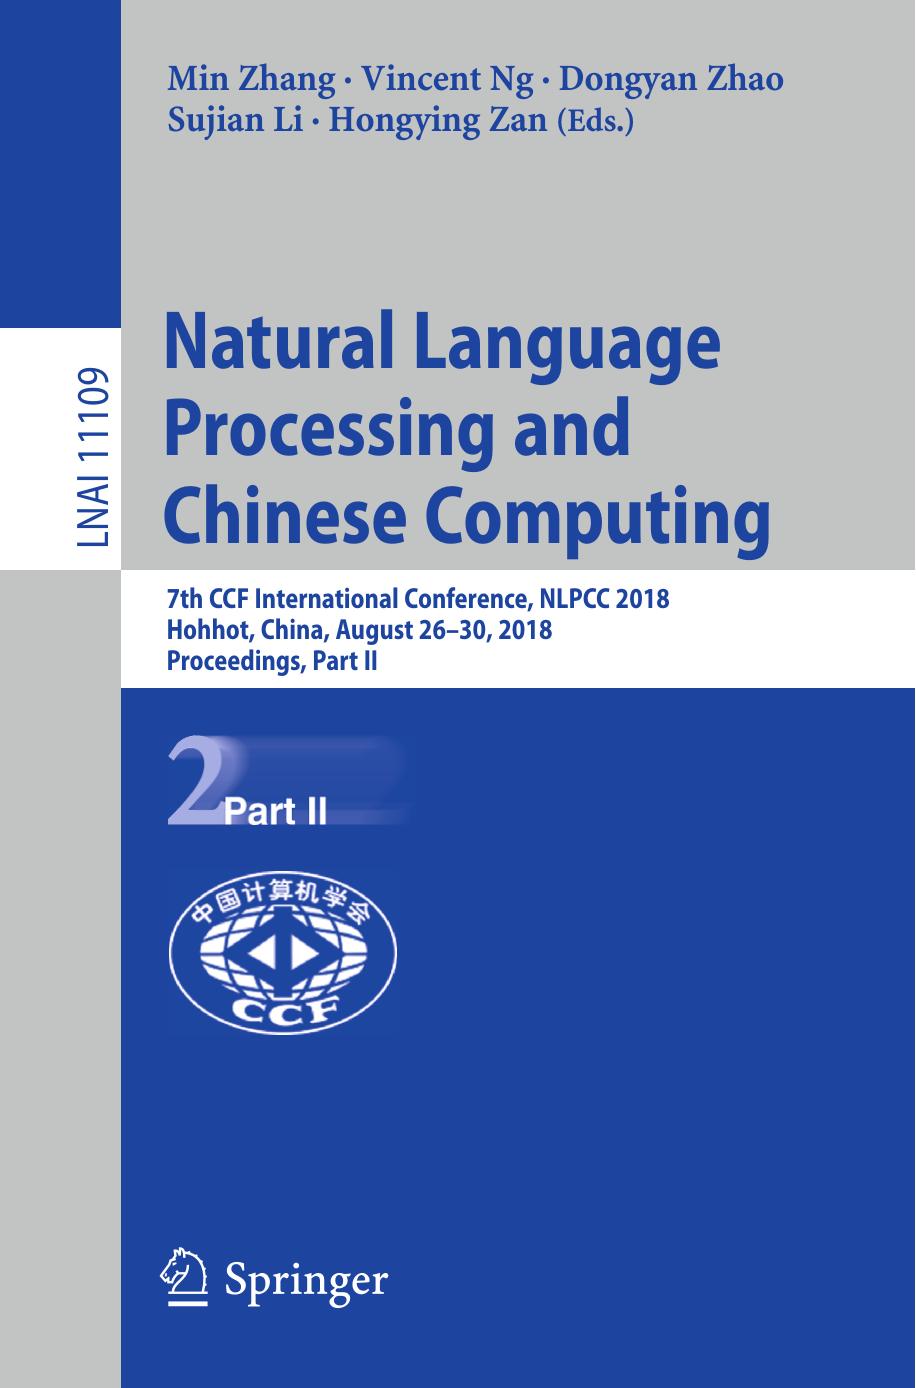 Natural Language Processing and Chinese Computing: 7th CCF International Conference, NLPCC 2018, Hohhot, China, August 26–30, 2018, Proceedings, Part II